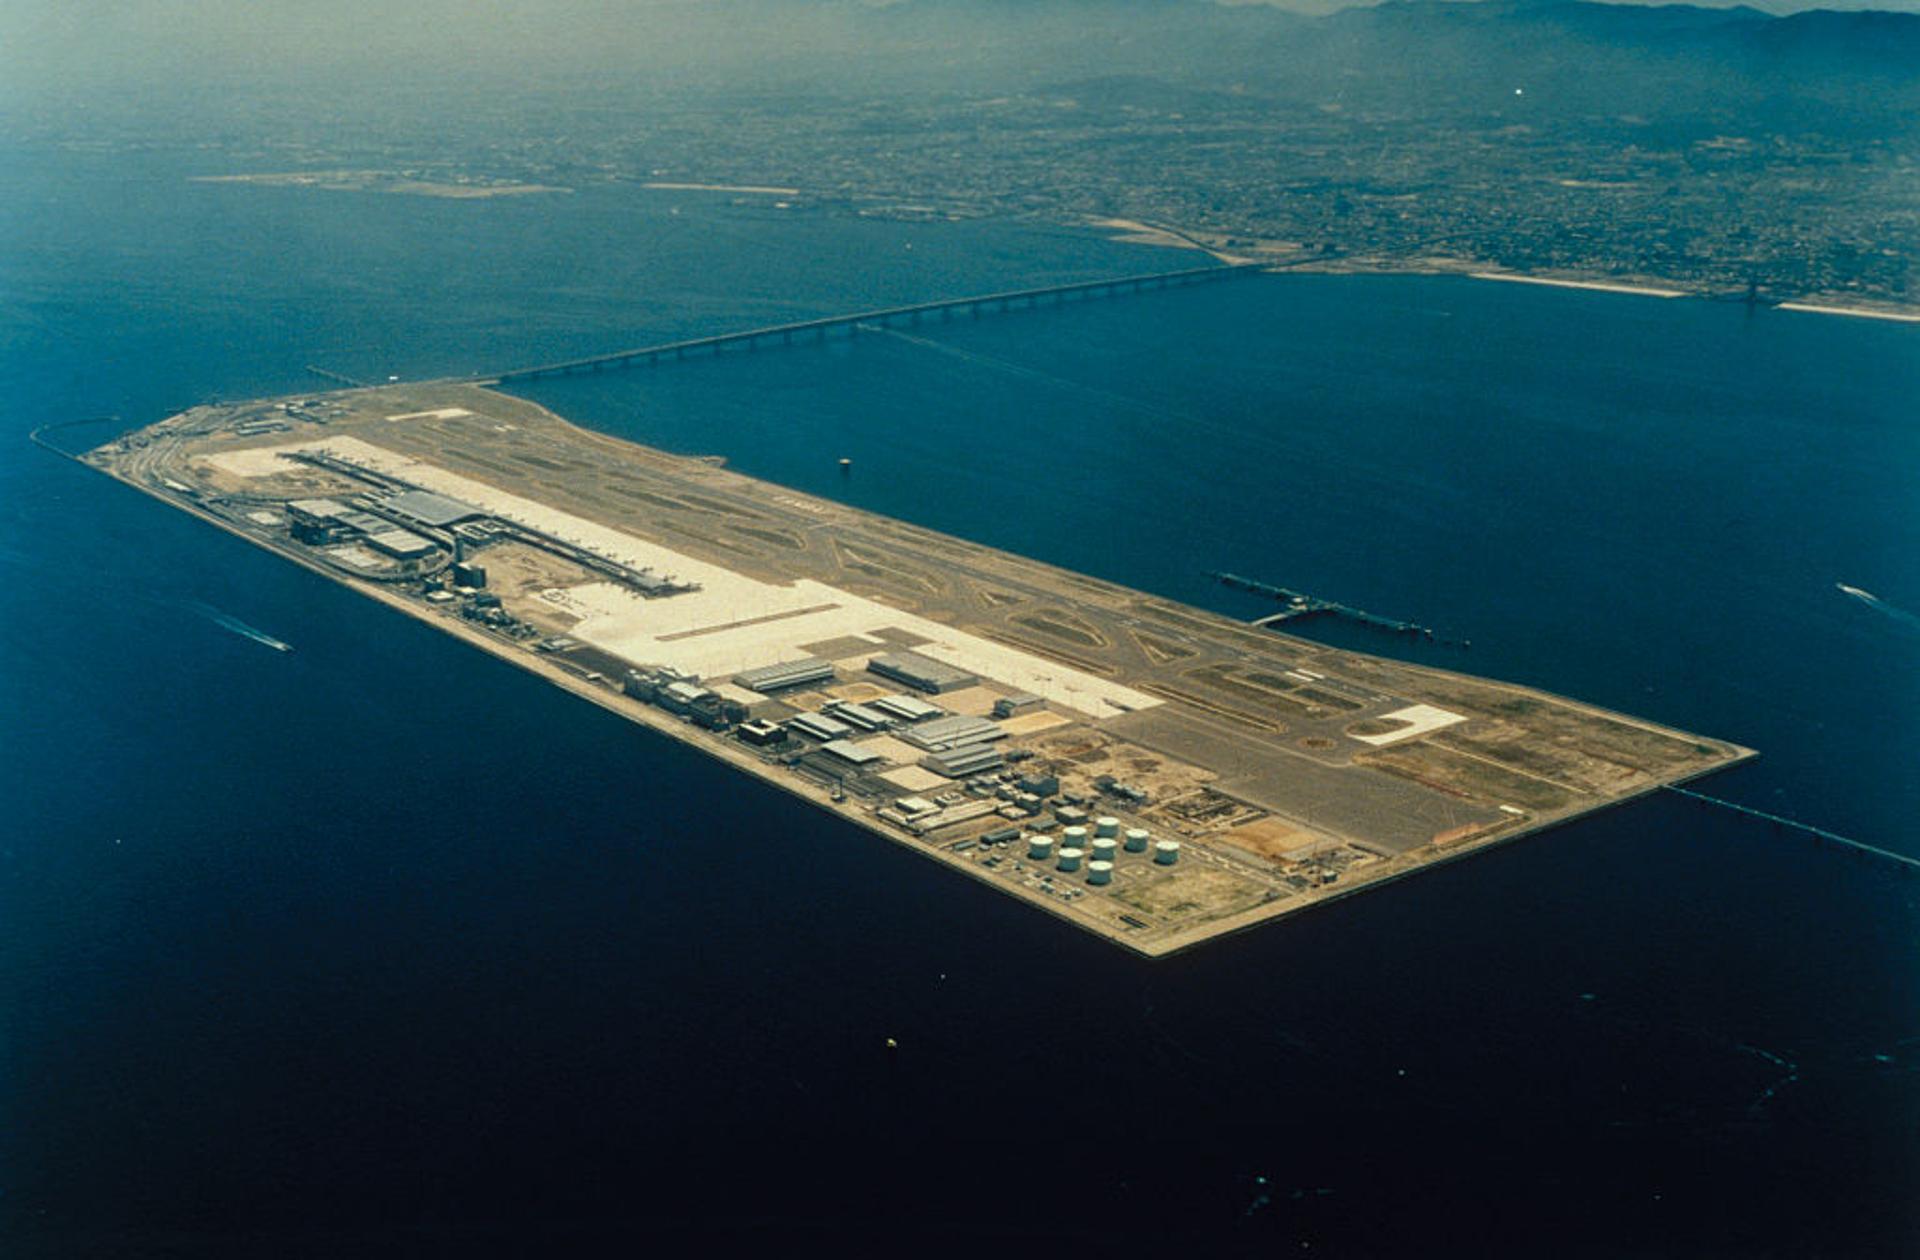 <p>Japan’s Kansai International Airport is making headlines as it slowly sinks beneath the waters of the eastern part of the Seto Inland Sea.</p> <p>The airport, which serves Japan's second-largest city, Osaka, was built on top of the water over three decades ago. However, it has sunk over 38 feet since then, and experts surmise parts could be fully submerged by 2056.</p>